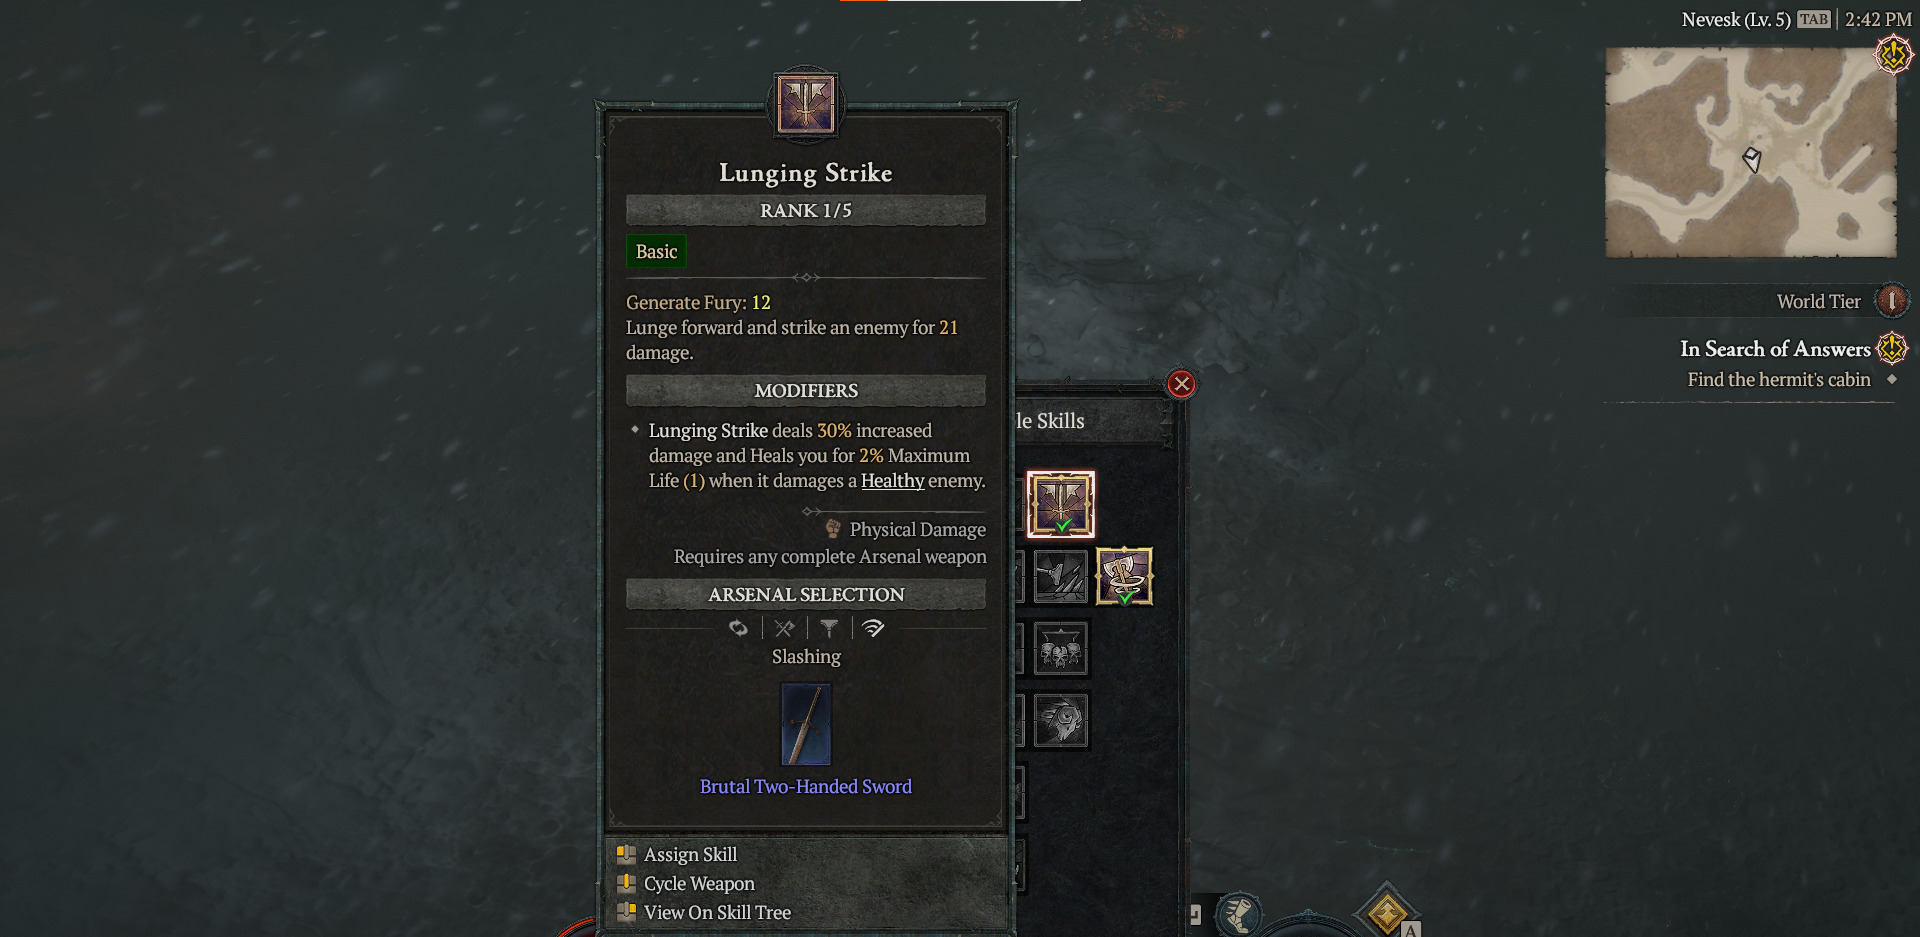 A screenshot showing the Lunging Strike ability in Diablo 4